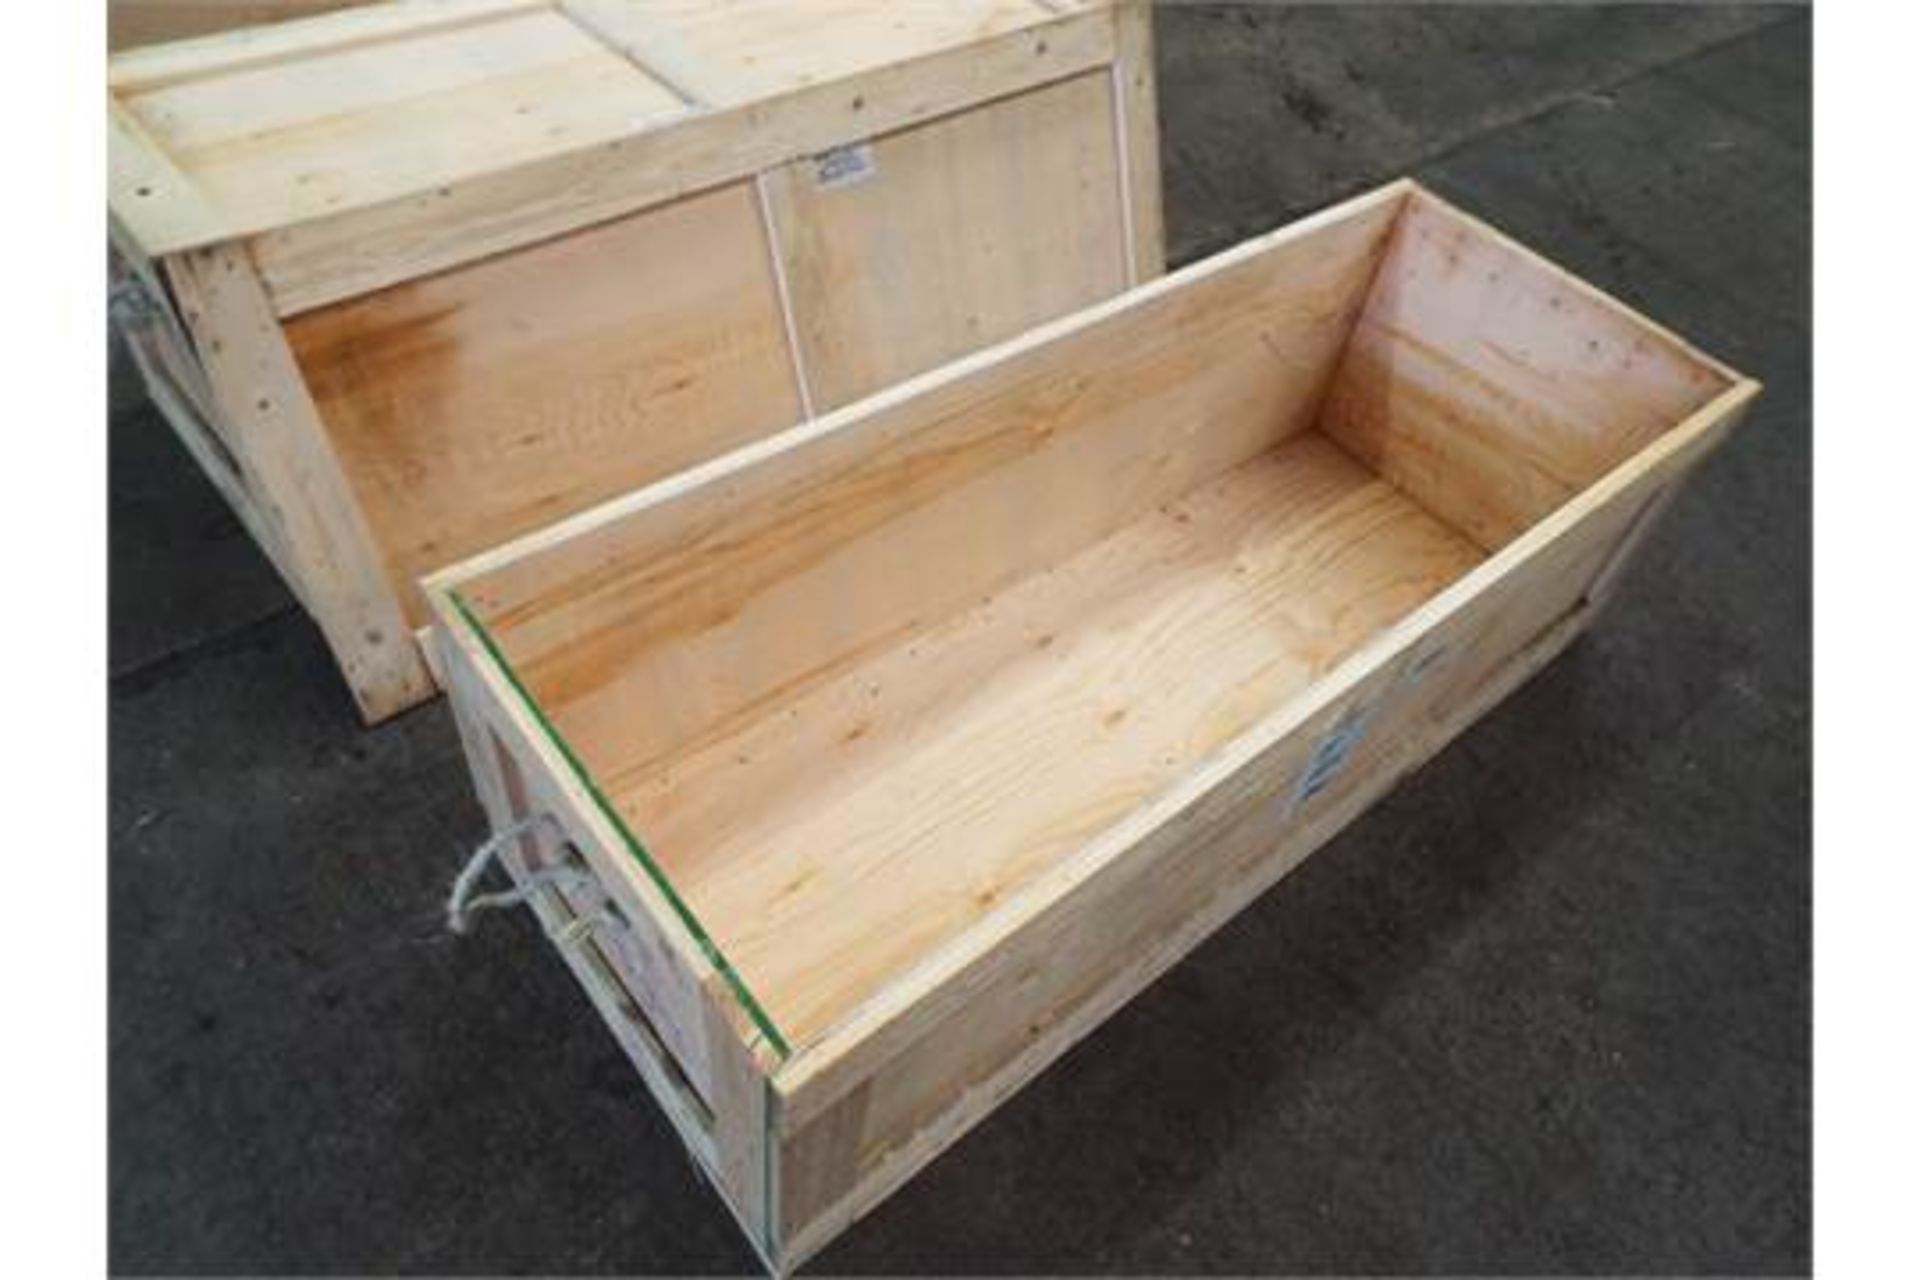 6 x Heavy Duty Packing/Shipping Crates - Image 4 of 6